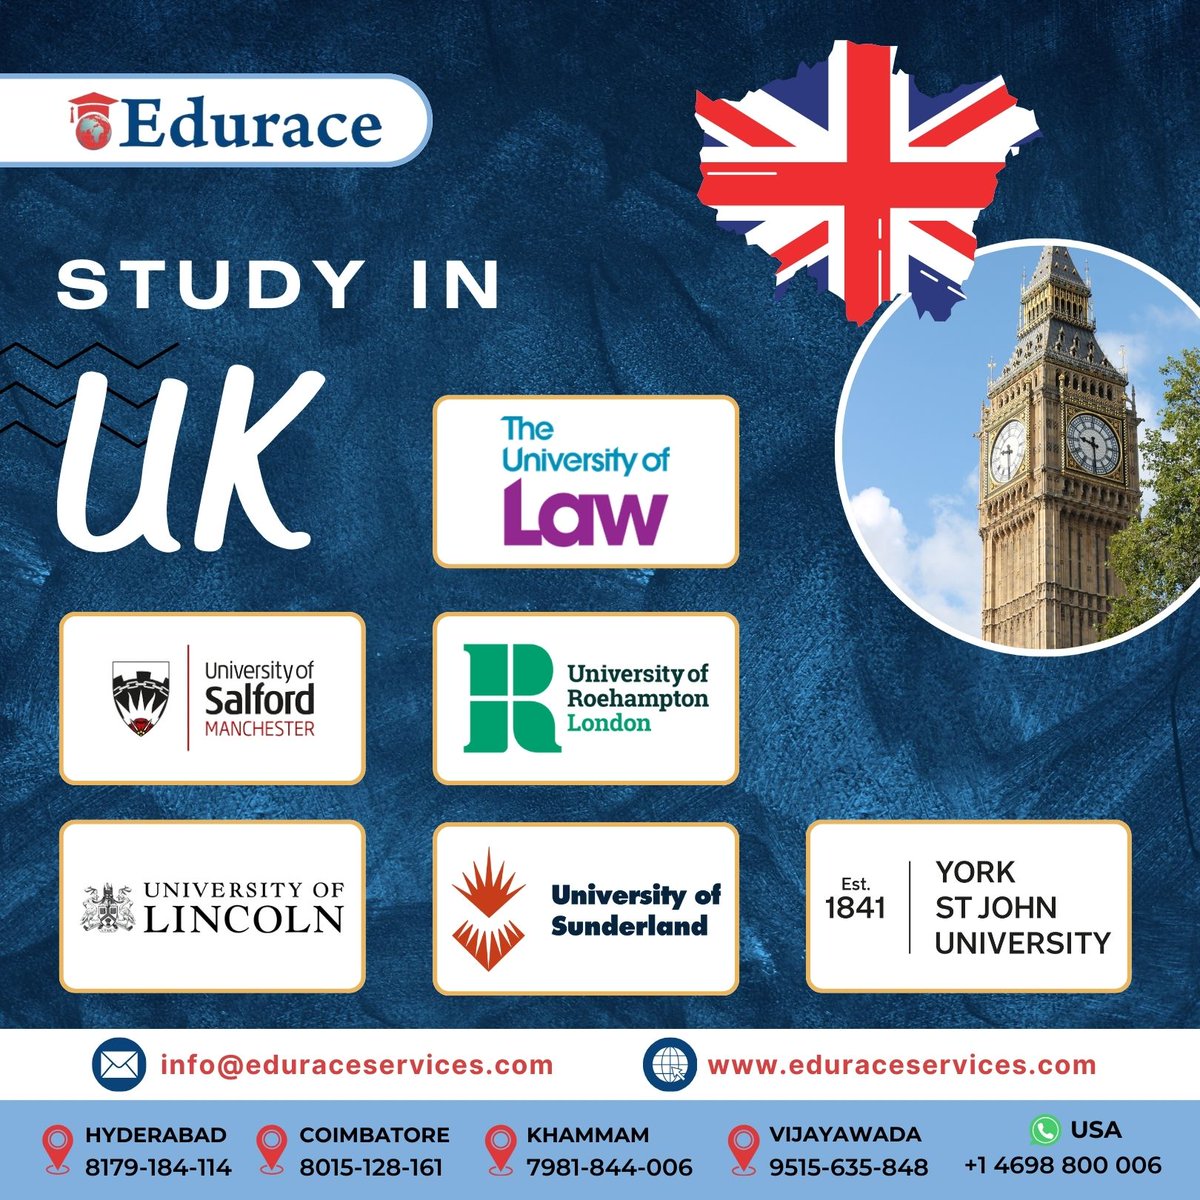 Discover your academic potential in the UK! 🎓 Whether you're dreaming of historic campuses, cutting-edge research facilities, or vibrant student communities, we've got you covered. Start your journey to excellence today!

#UKColleges #studyinuk #studyabroad #eduraceservices